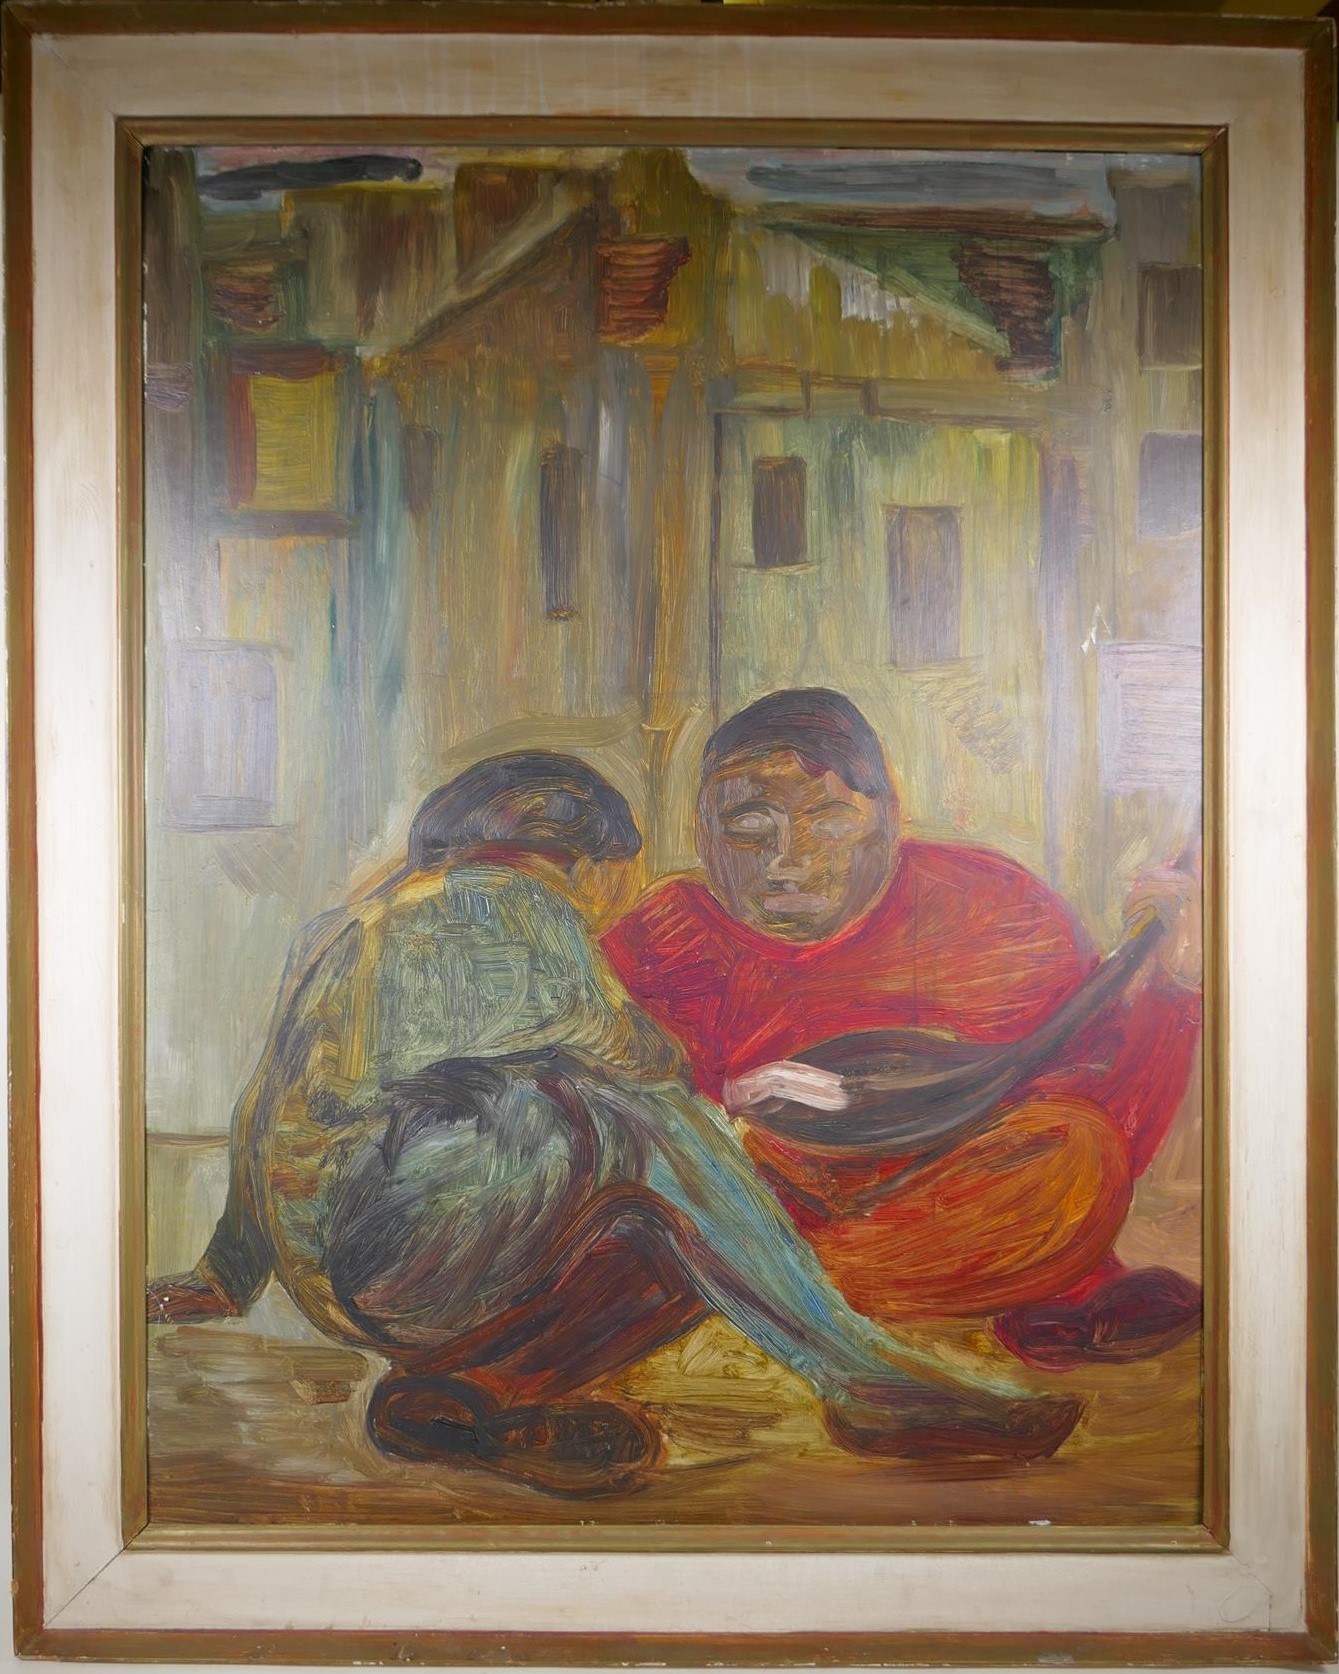 Two figures in a city scape, contemporary oil on board, 28" x 36" - Image 3 of 4